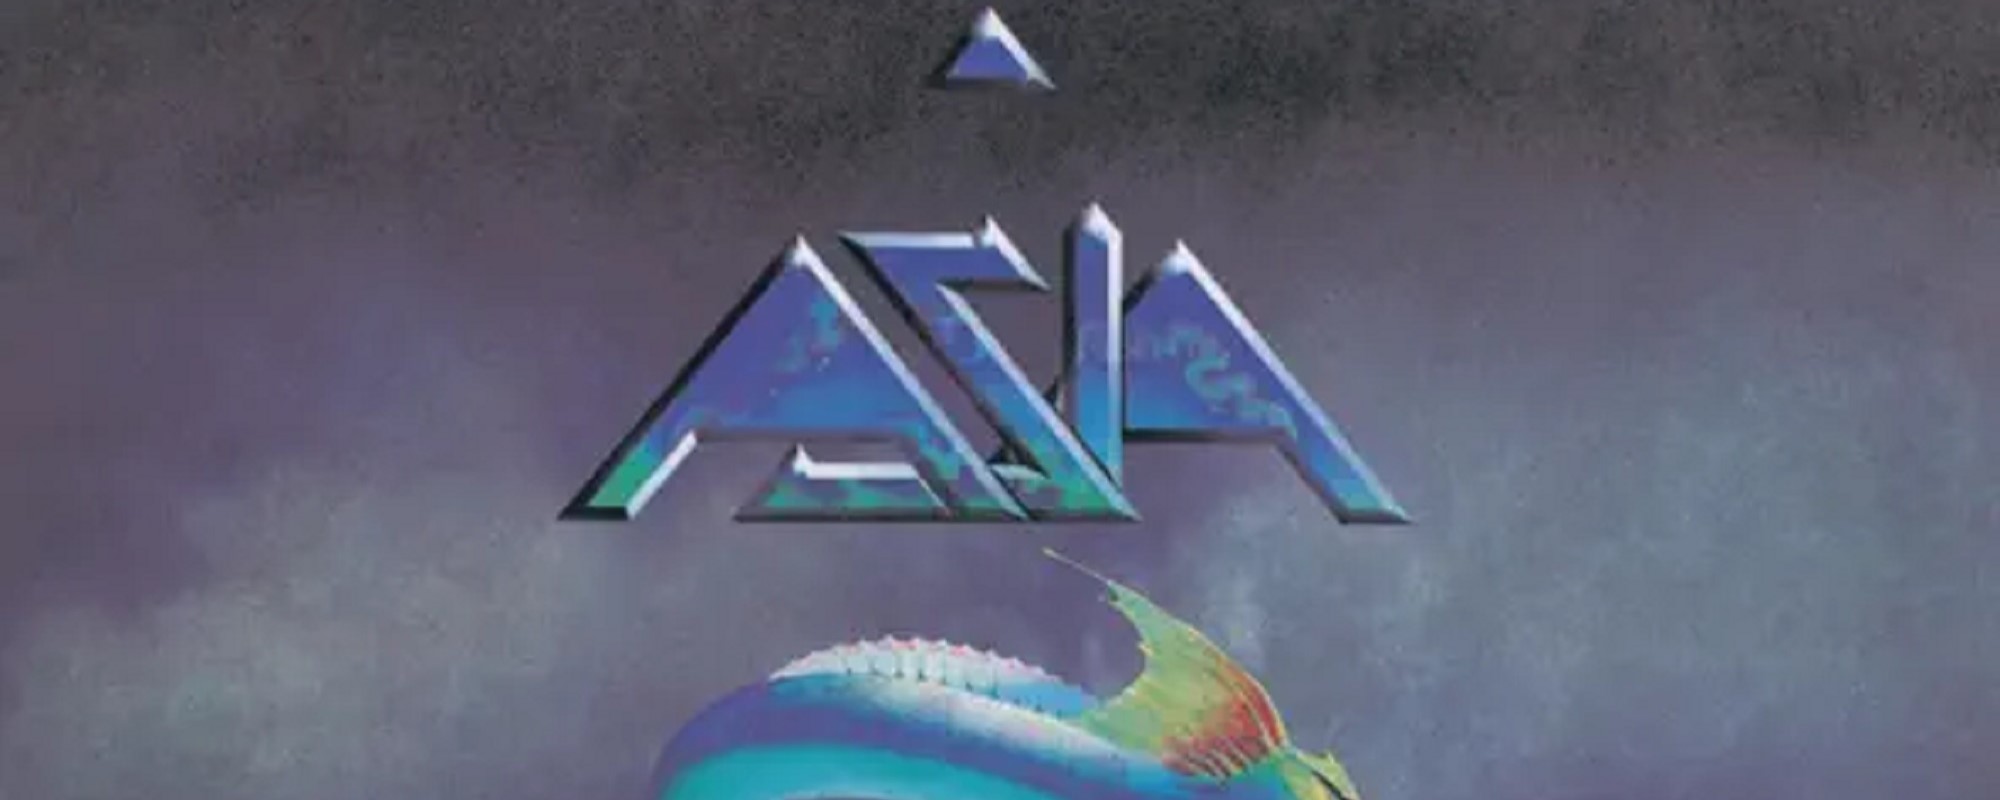 Remember When Asia Topped the ‘Billboard’ 200 with Their Self-Titled Debut, Which Became 1982’s Best-Selling Album